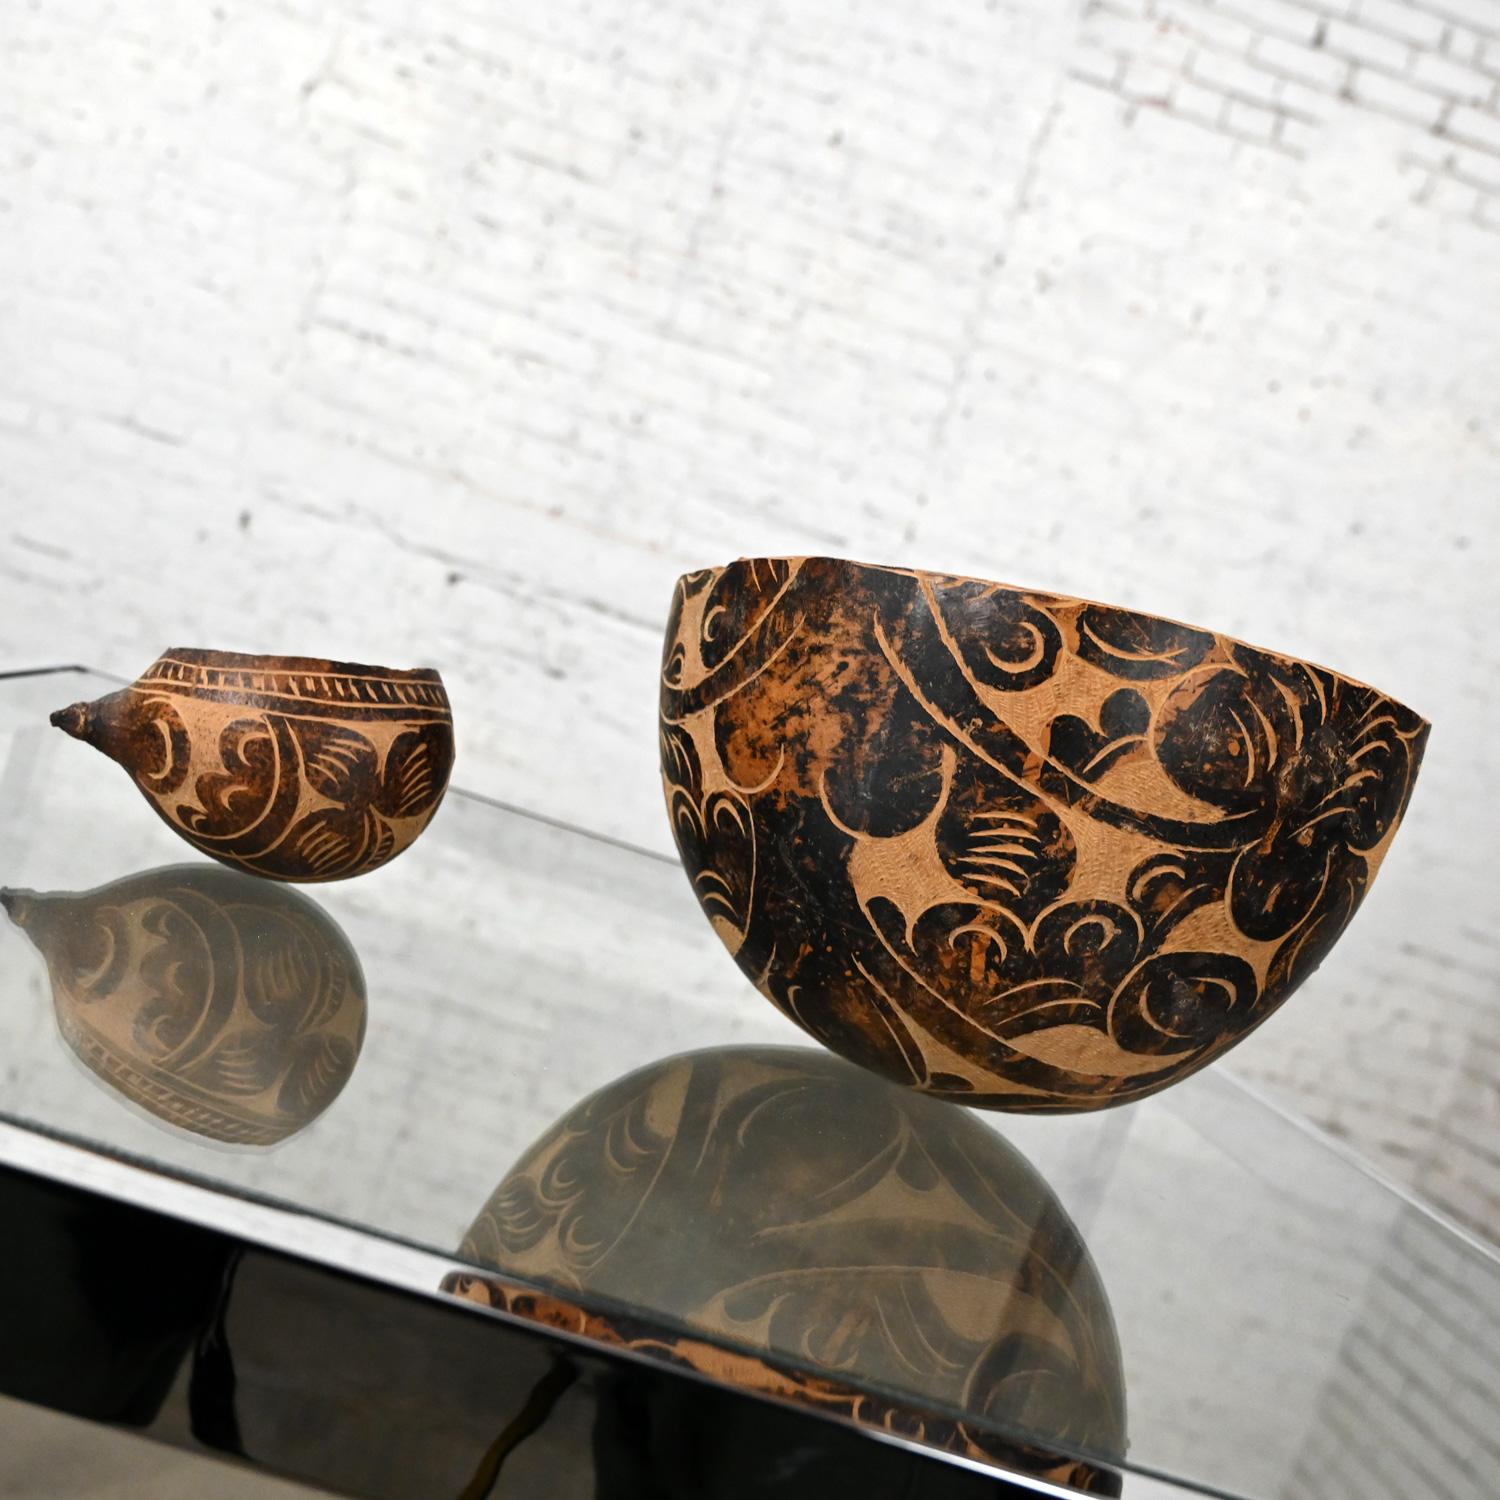 Stunning Mid to Late 20th Century South American Tribal gourd bowls with hand carved floral details, a pair. Beautiful condition, keeping in mind that these are vintage and not new so will have signs of use and wear. Please see photos and zoom in